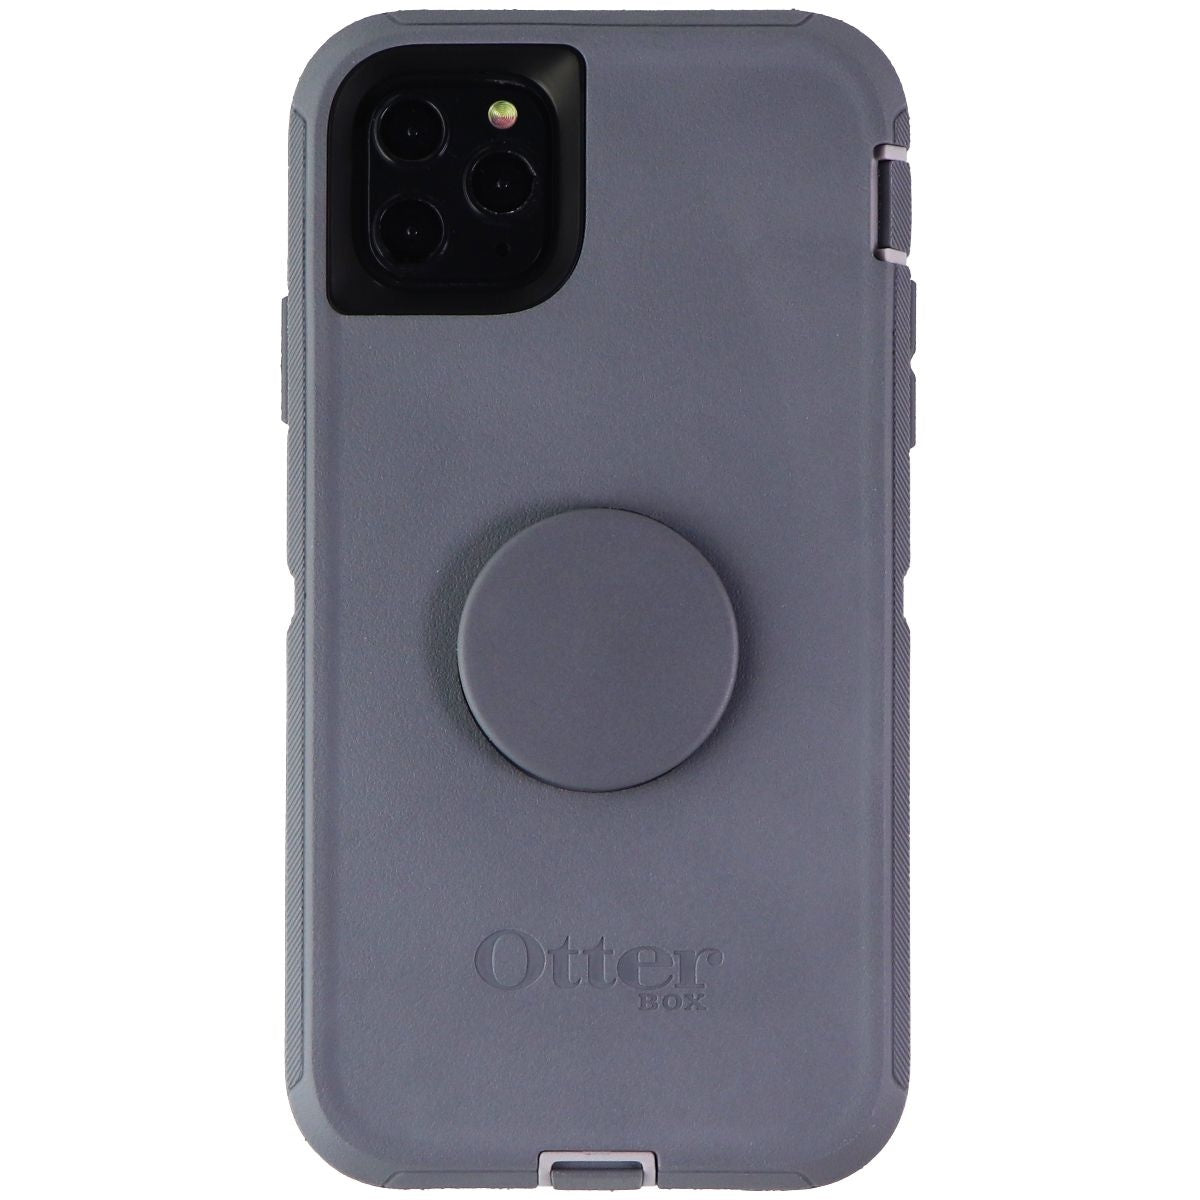 Otter + Pop Defender Series Case for iPhone 11 Pro Max - Howler Grey